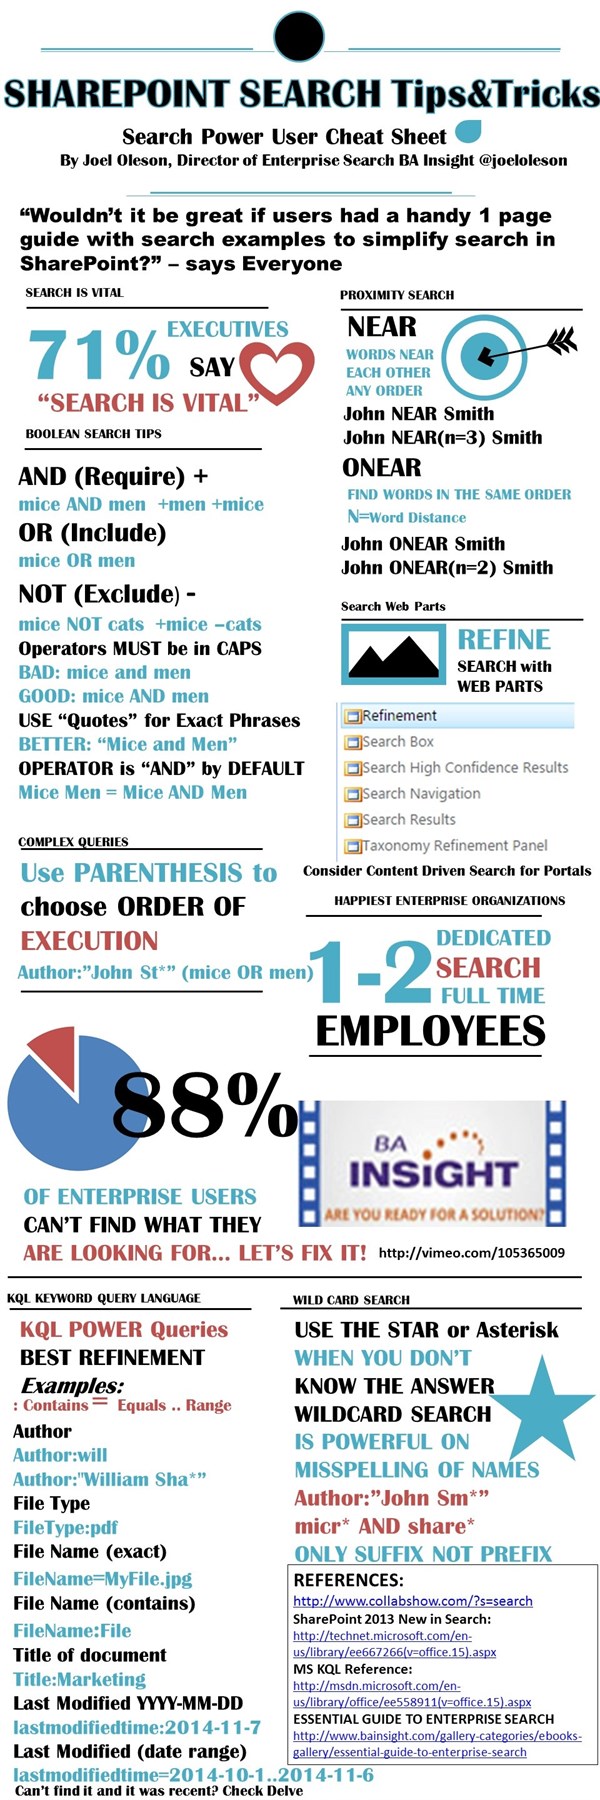 SharePoint Search Tips Infographic